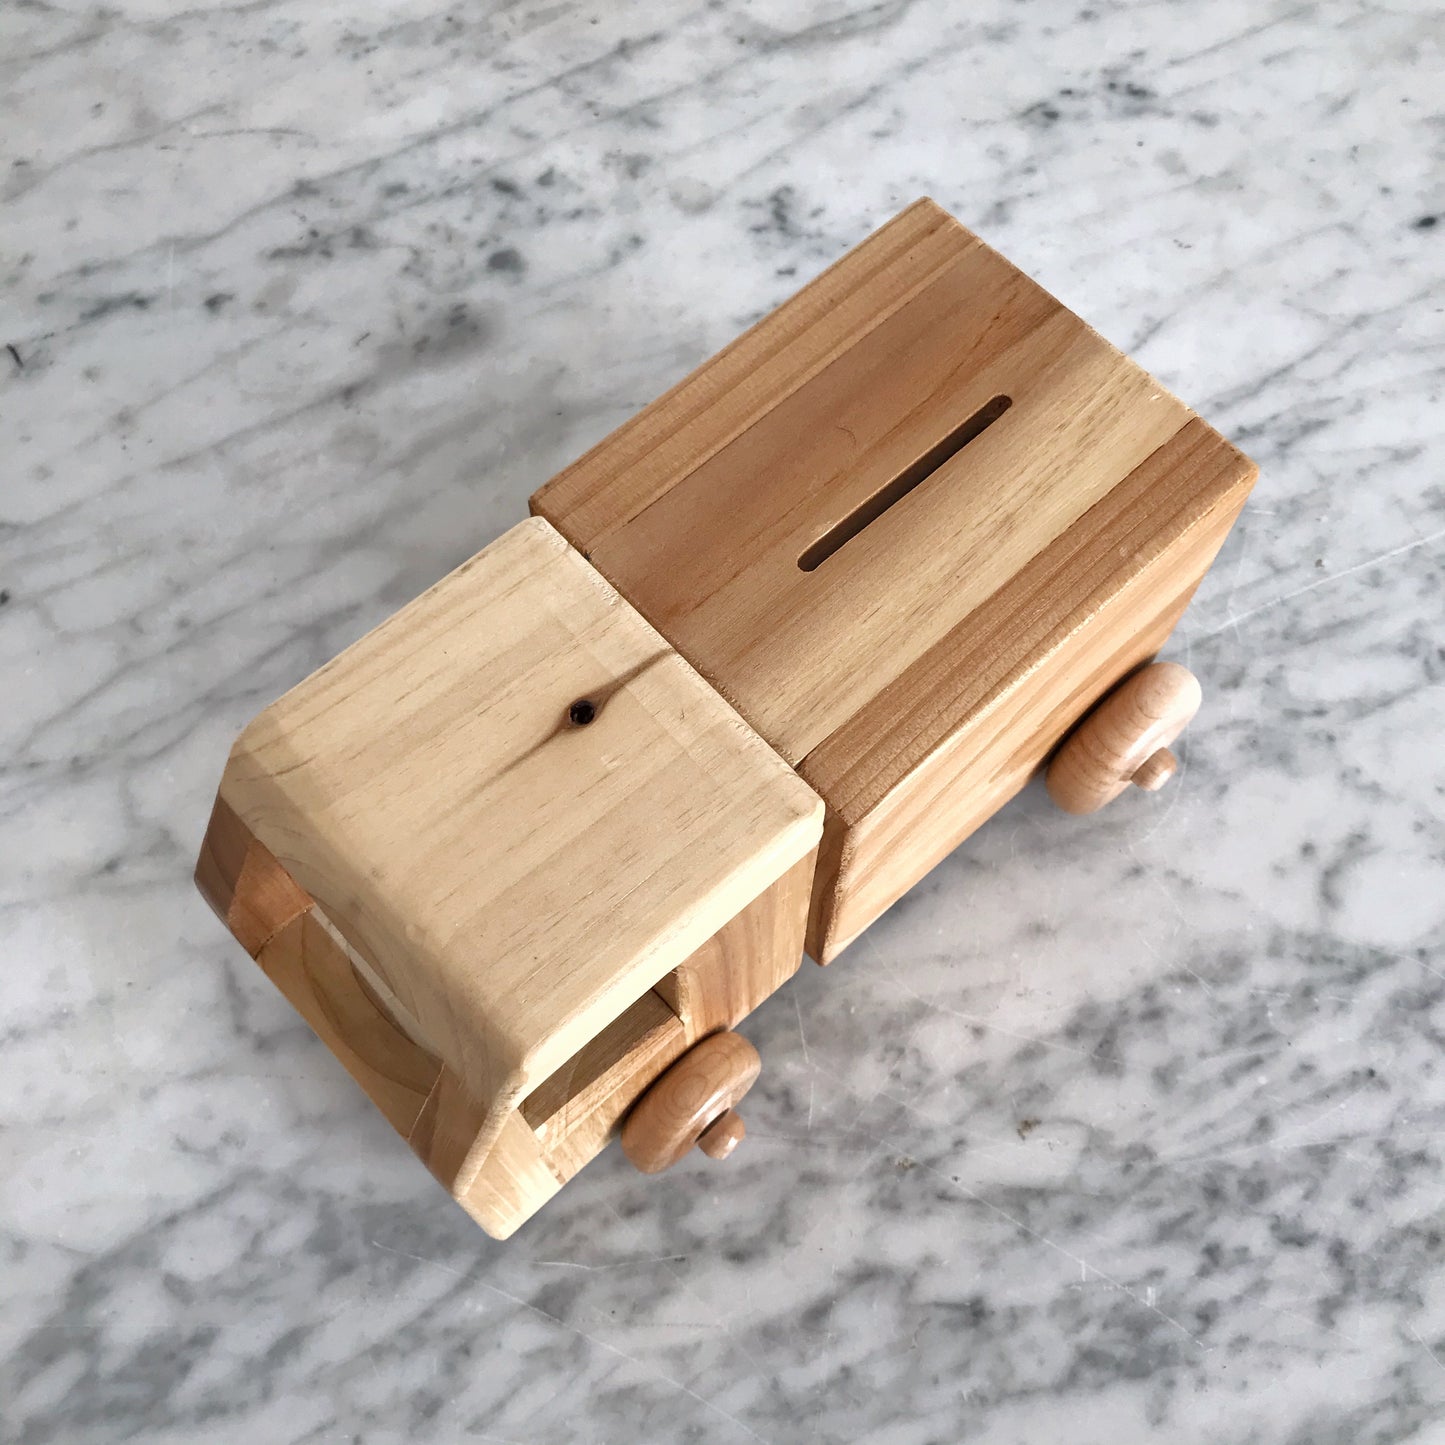 Handcrafted Wooden Truck Coin Bank